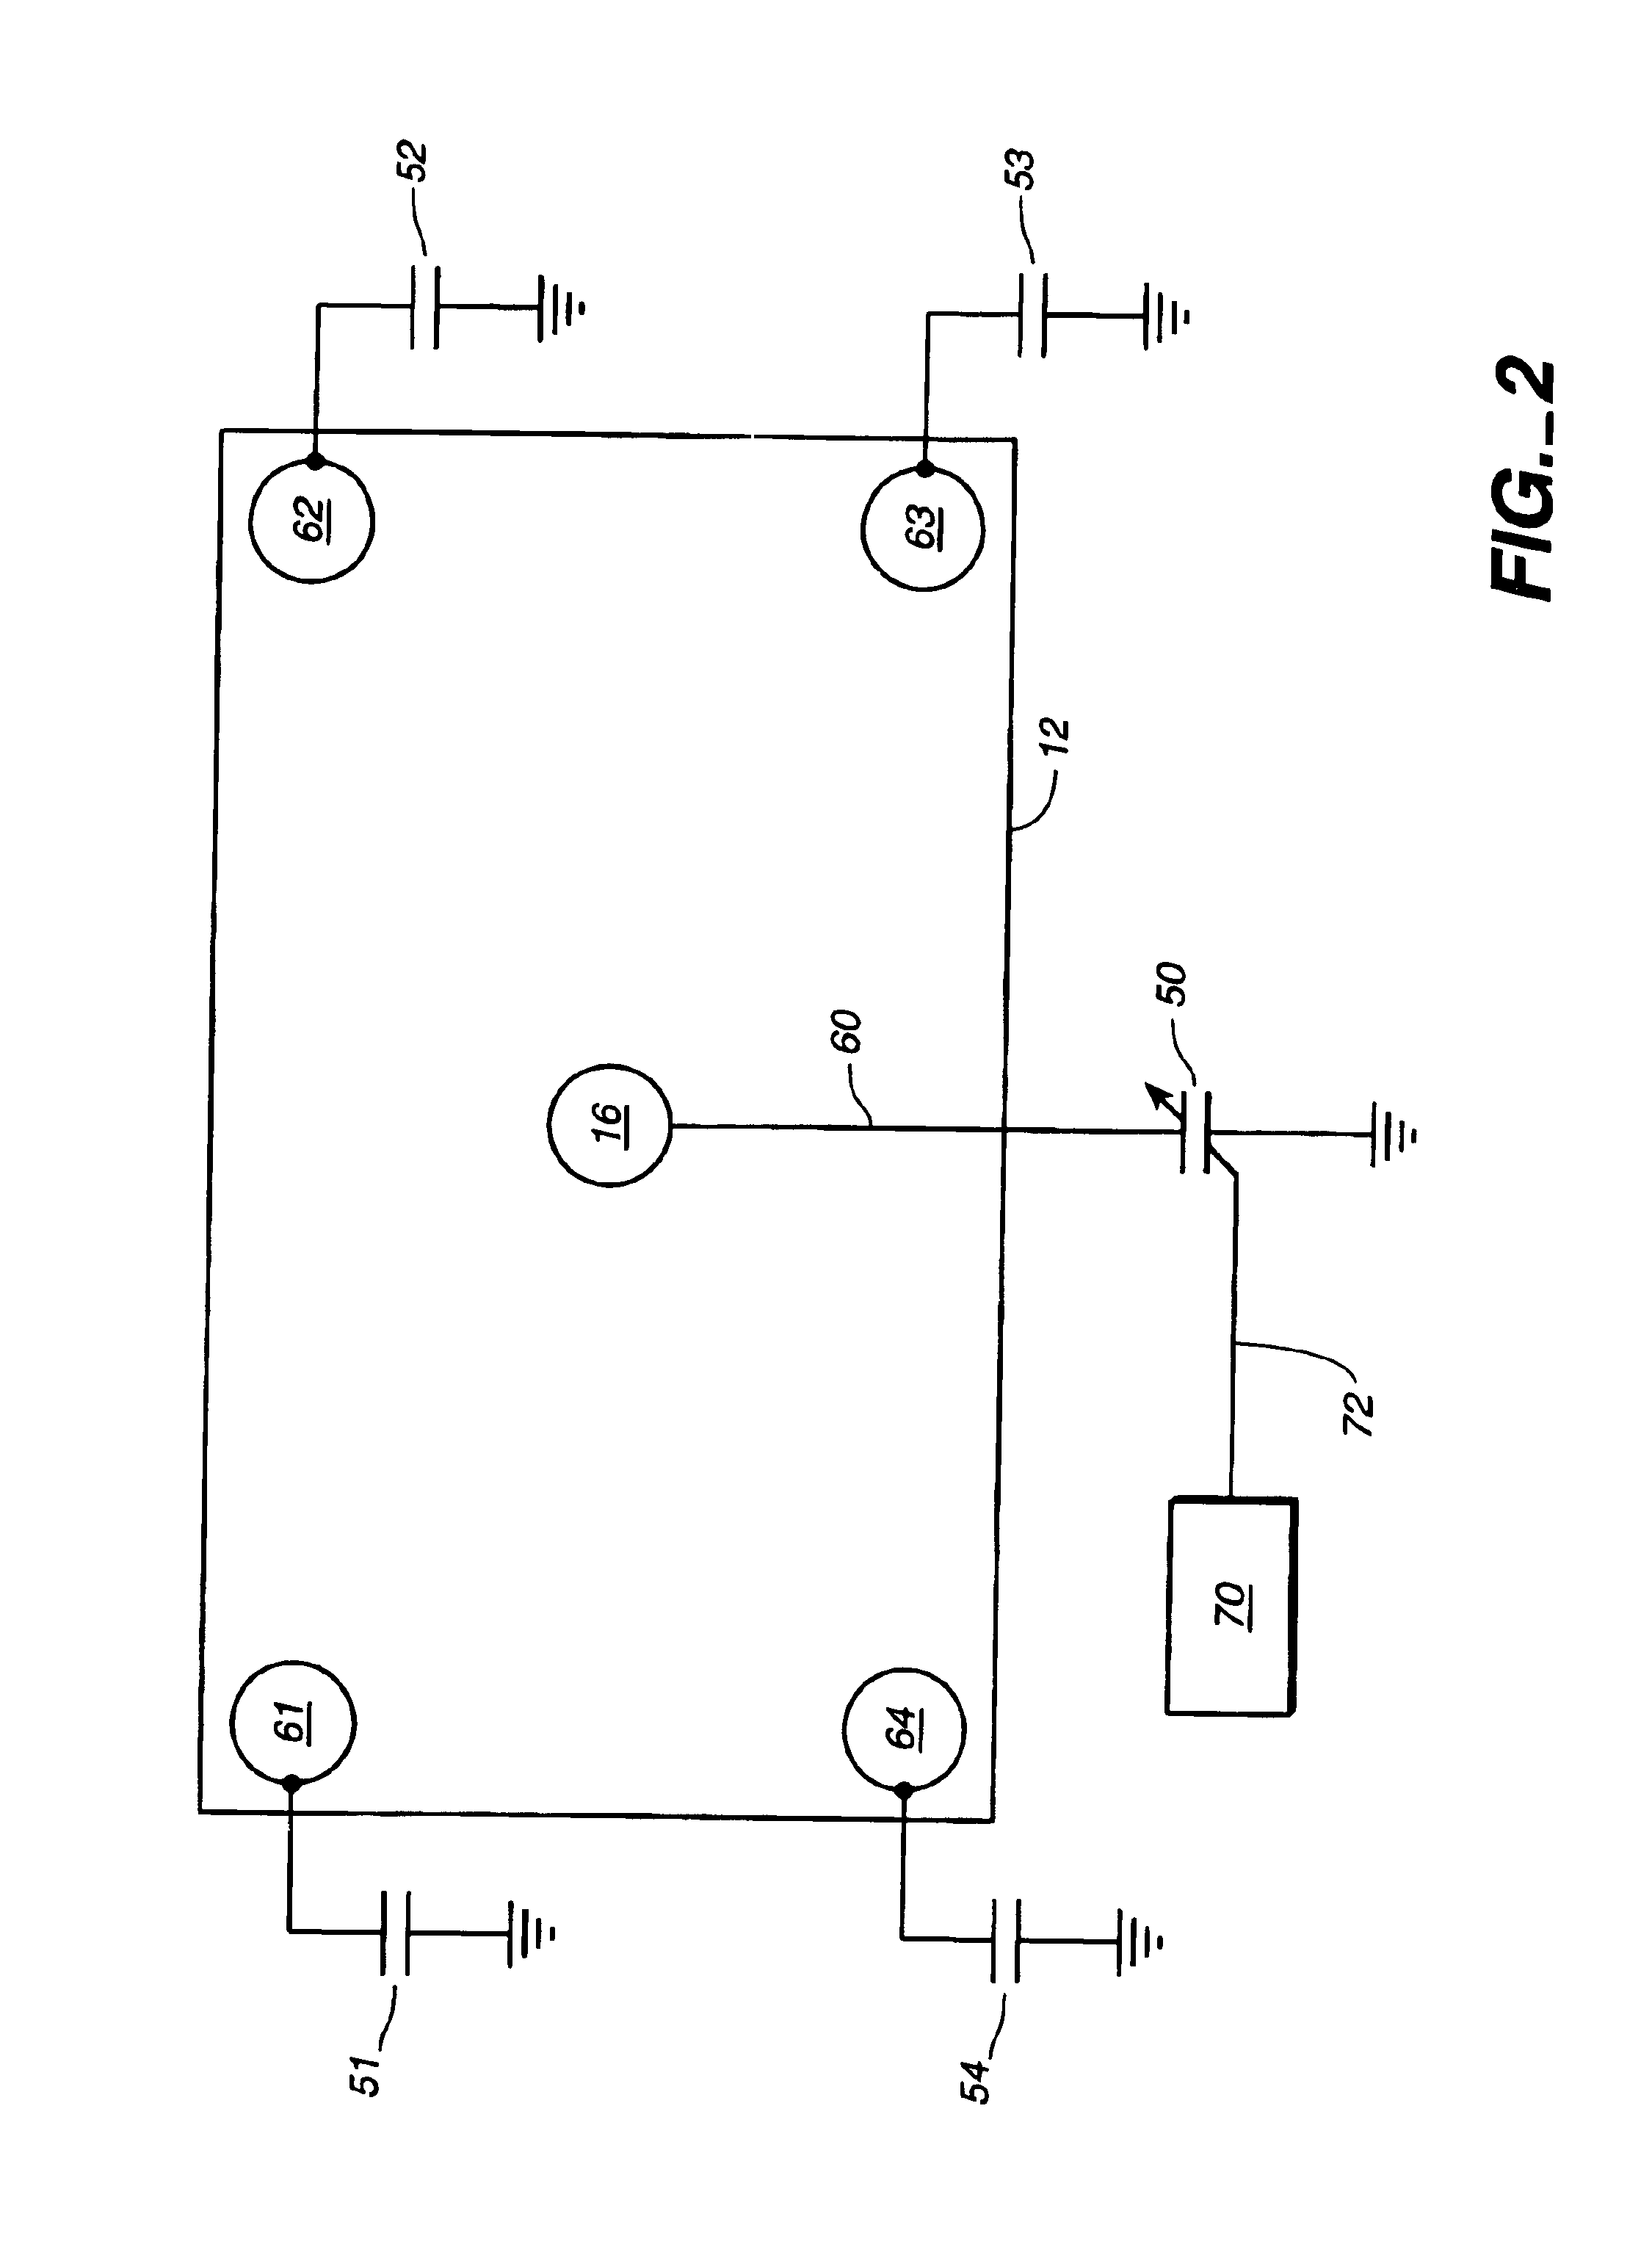 Multiple frequency plasma chamber with grounding capacitor at cathode